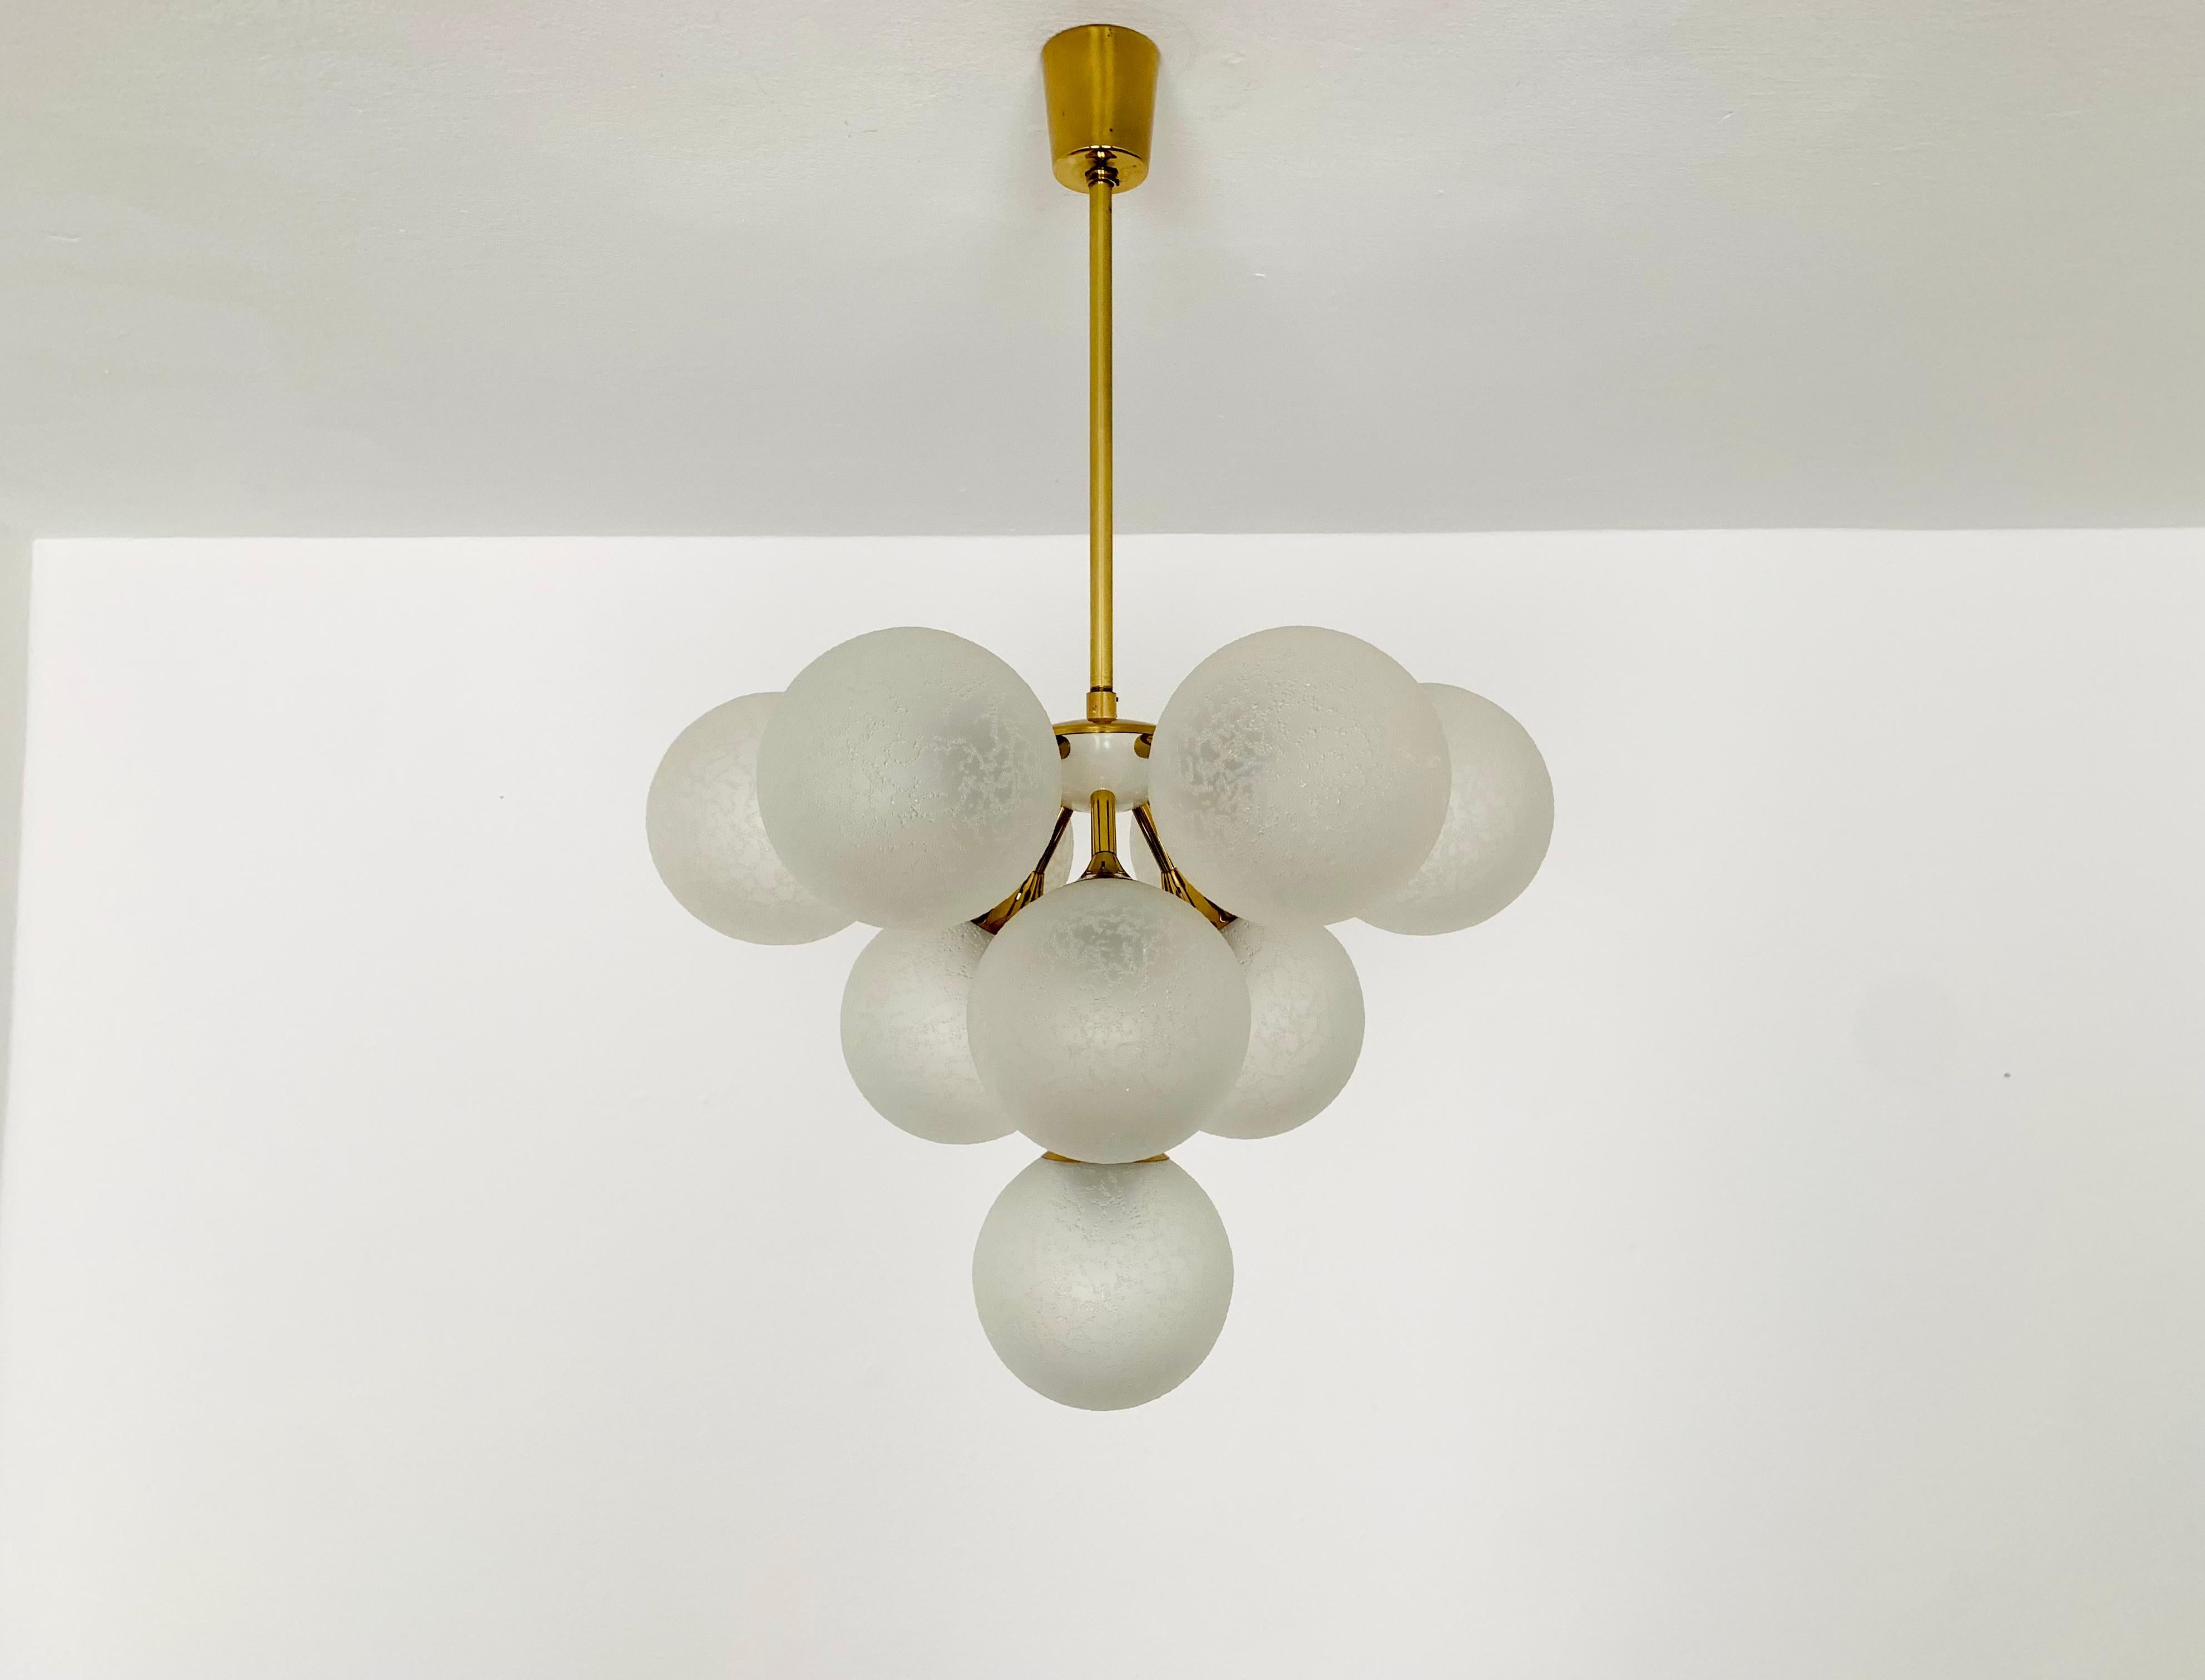 Extremely beautiful and rare Sputnik chandelier from the 1960s.
The 10 special lampshades spread a pleasant light.
The lamp has a very high quality finish.
Very contemporary design with a fantastic look.

Condition:

Very good vintage